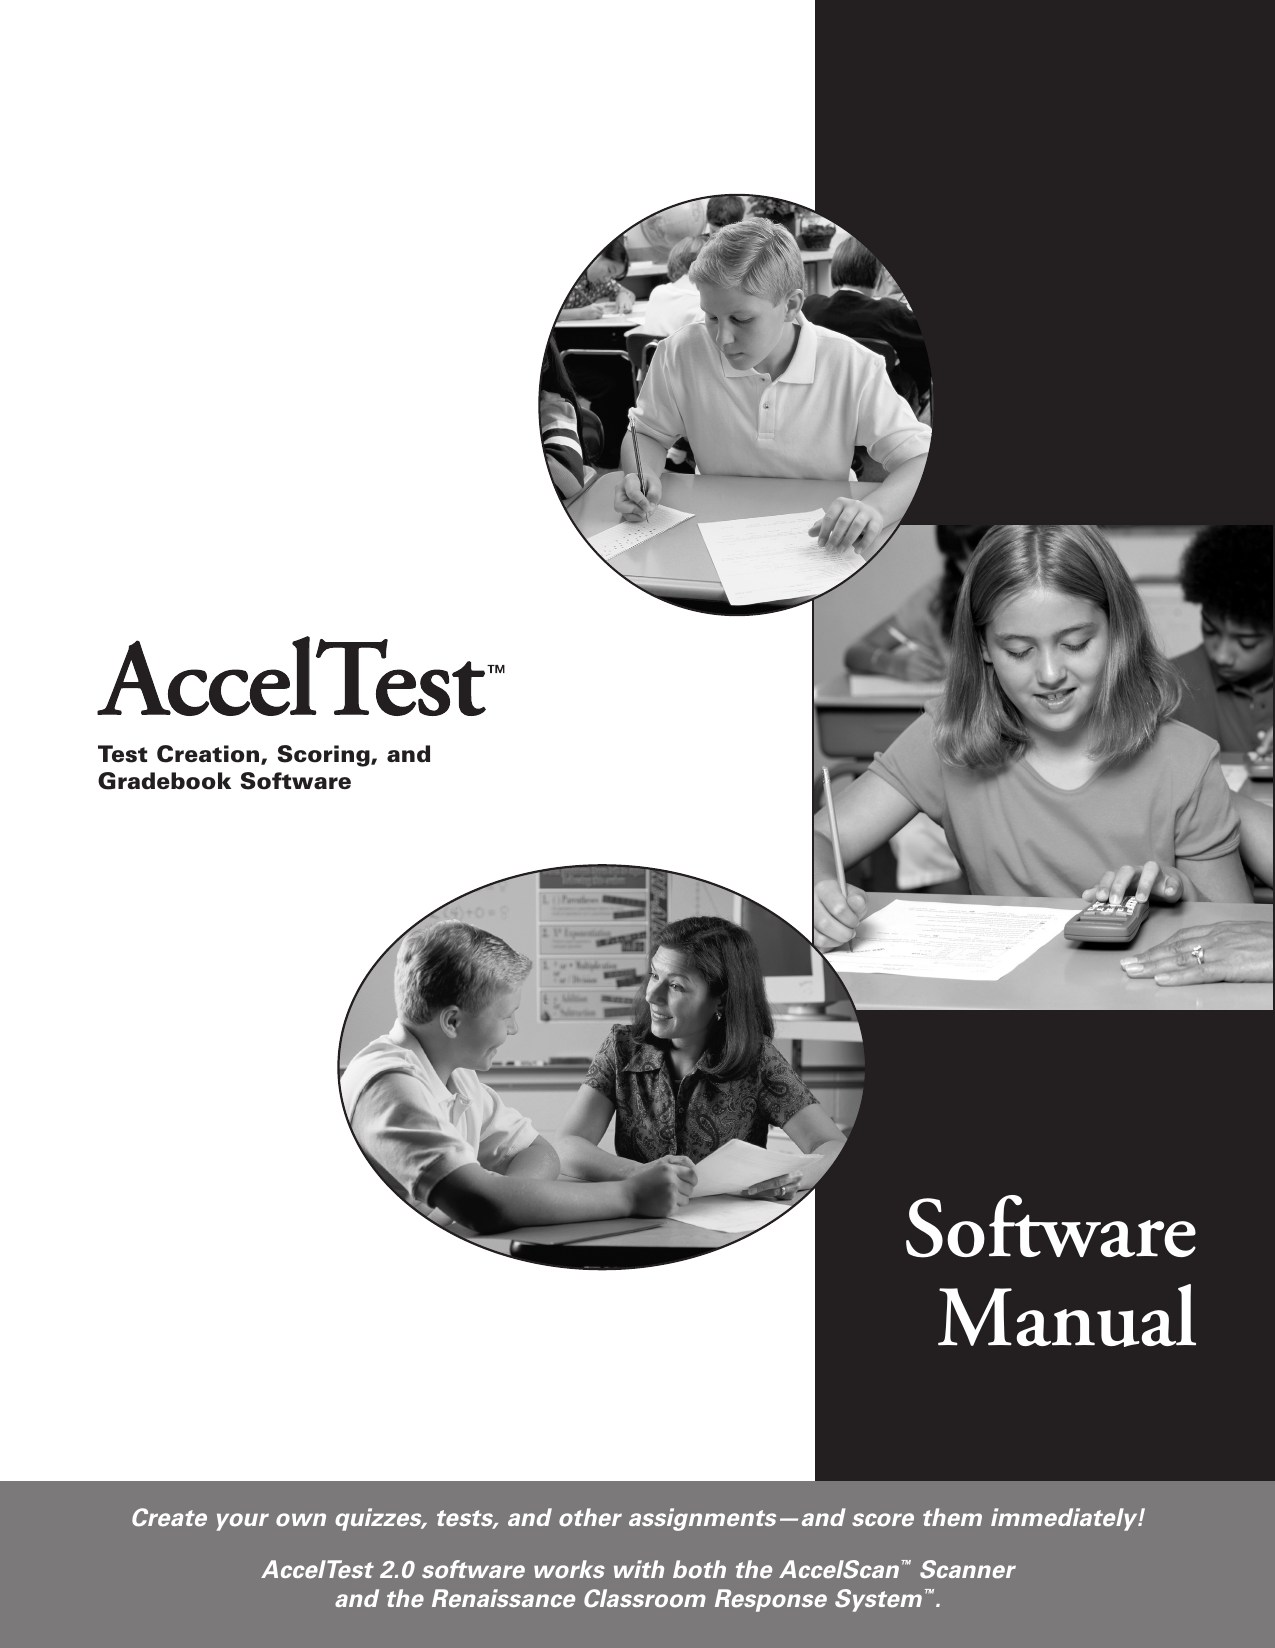 Test Creation, Scoring, andGradebook SoftwareCreate your own quizzes, tests, and other assignments—and score them immediately!SoftwareManualAccelTest 2.0 software works with both the AccelScan™Scanner and the Renaissance Classroom Response System™.